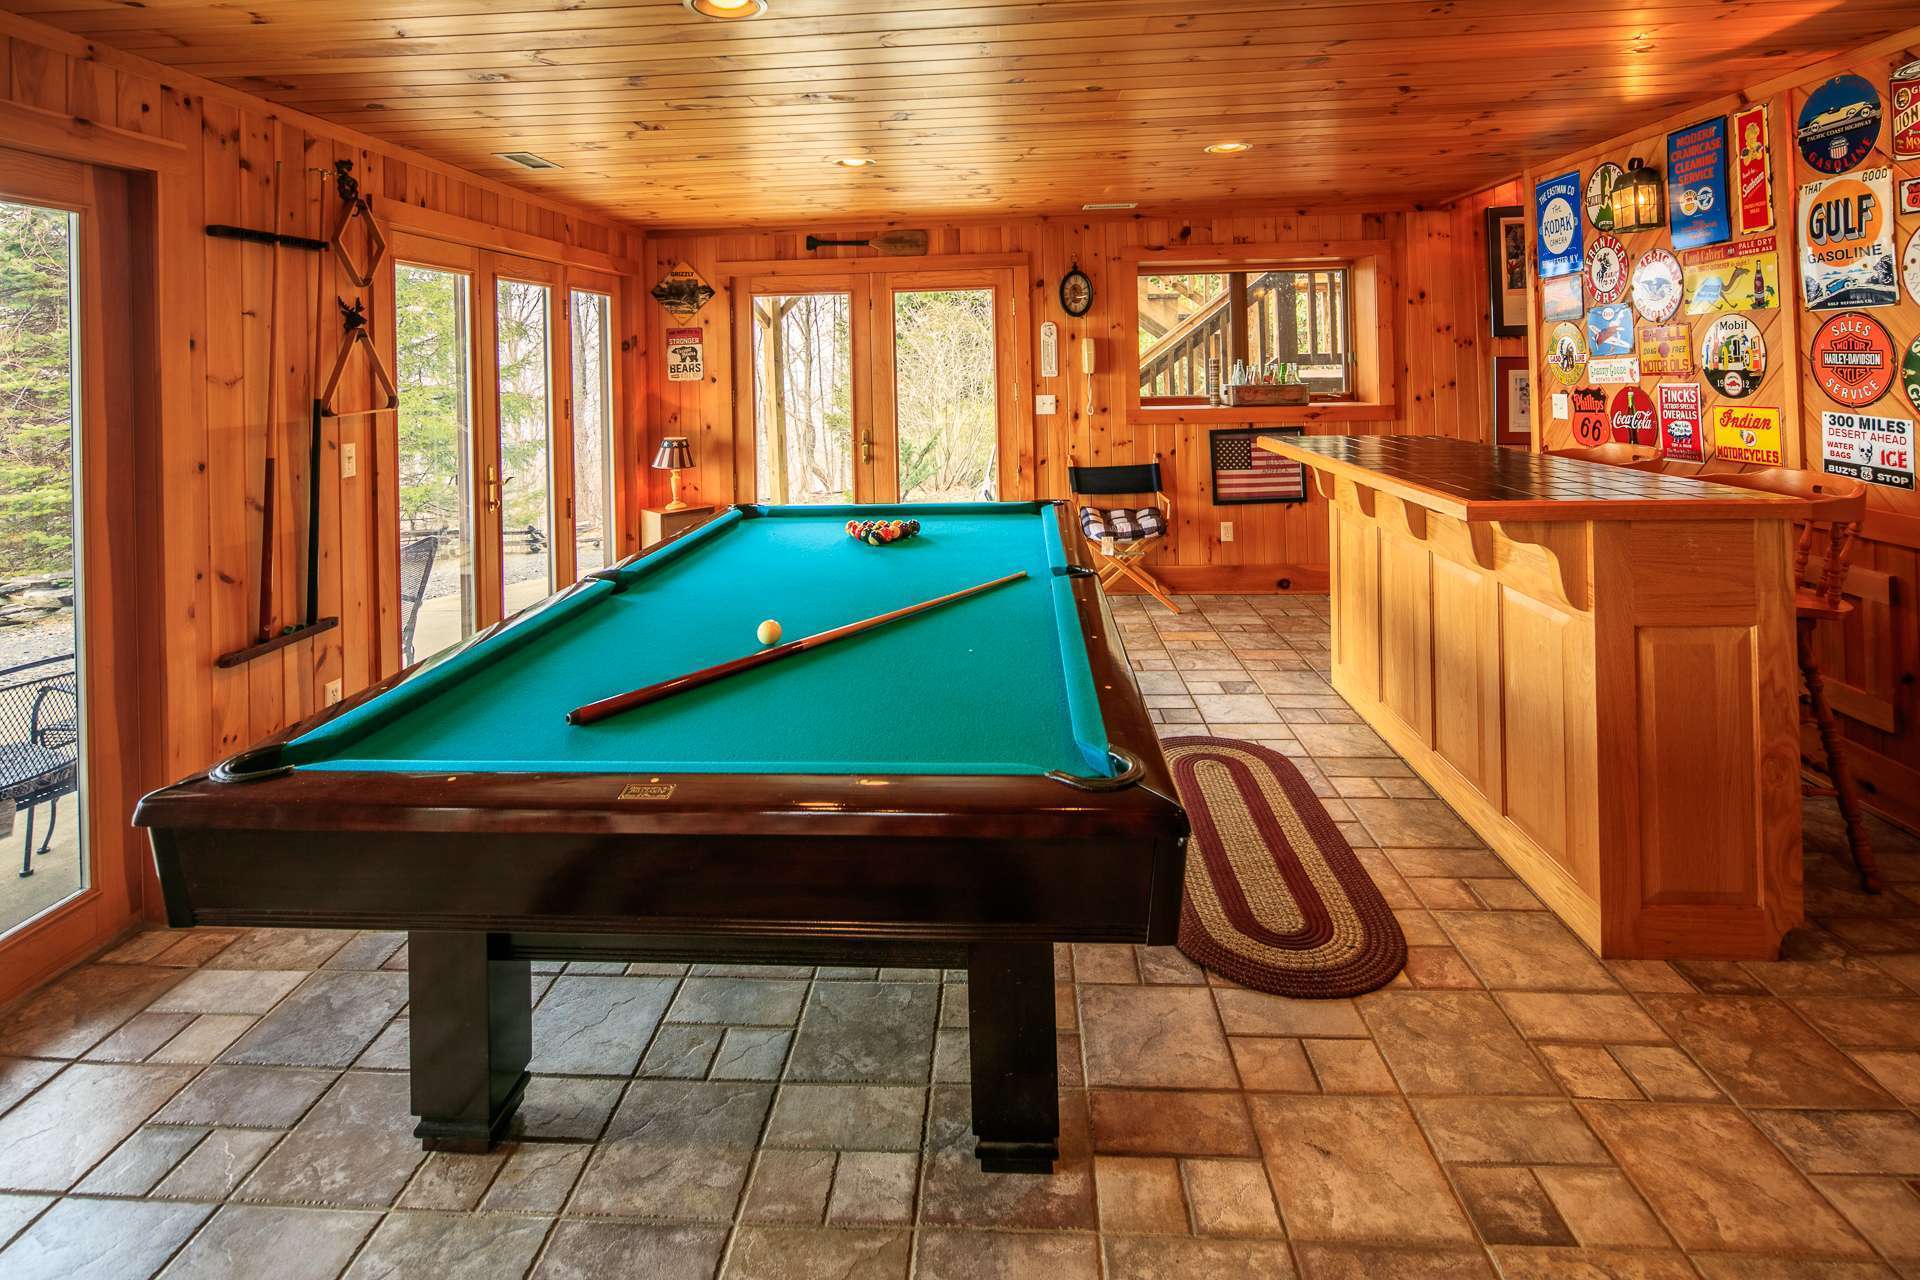 Complete with a bar area, this space is great for entertaining and the ultimate "Man Cave."